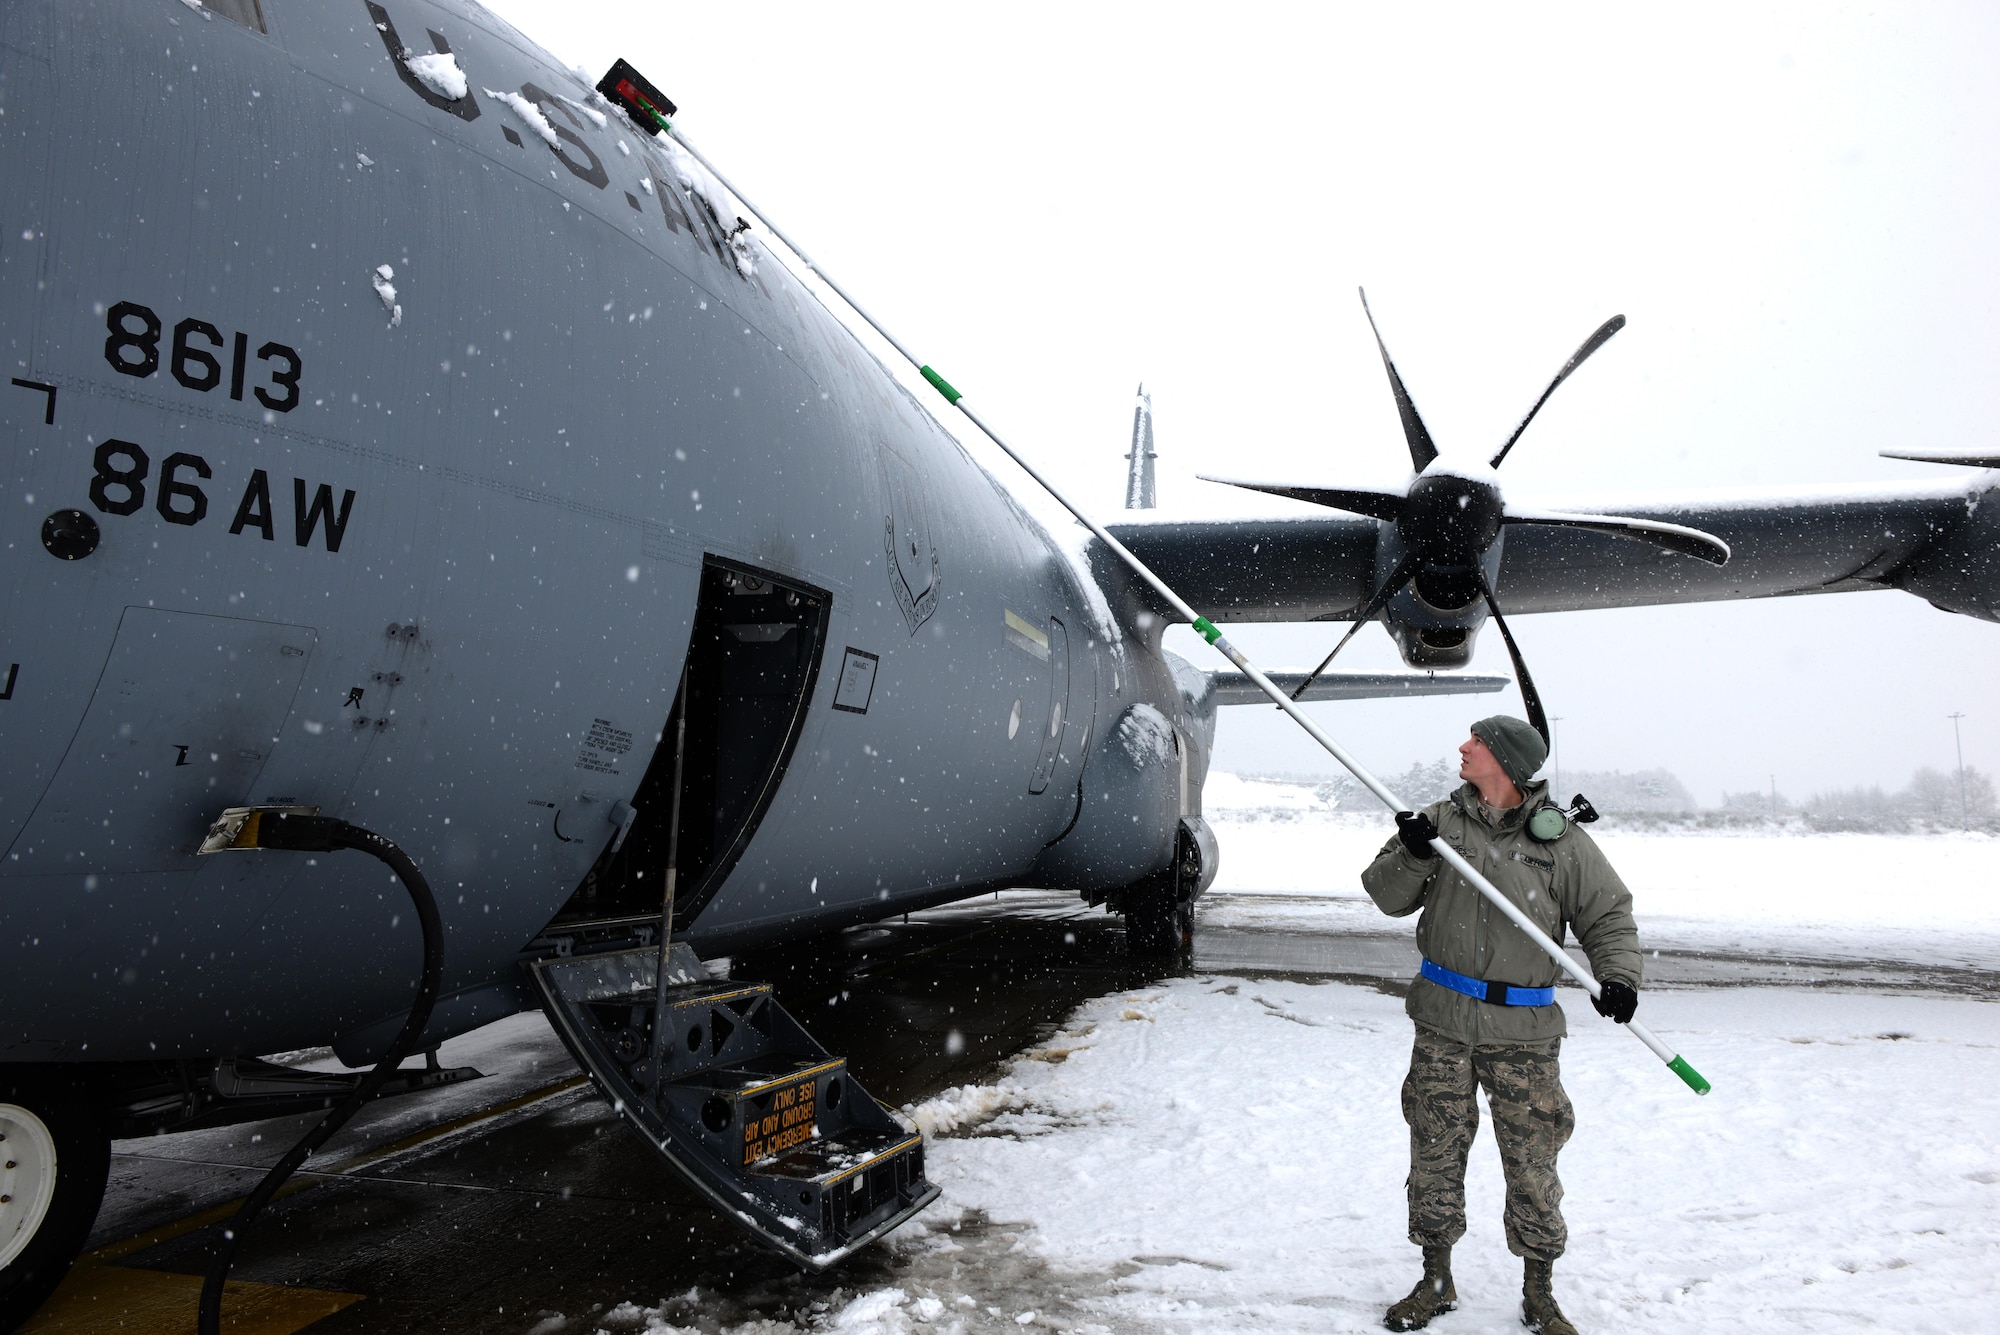 Airman 1st Class Jacob Taatjes, 86th Aircraft Maintenance Squadron crew chief, removes snow from a C-130J Super Hercules aircraft at Ramstein Air Base, Germany, Jan. 10, 2017. Continuous heavy snow persisted throughout the majority of the day, prompting snow removal operations throughout the base.. (U.S. Air Force photo by Airman 1st Class Joshua Magbanua)